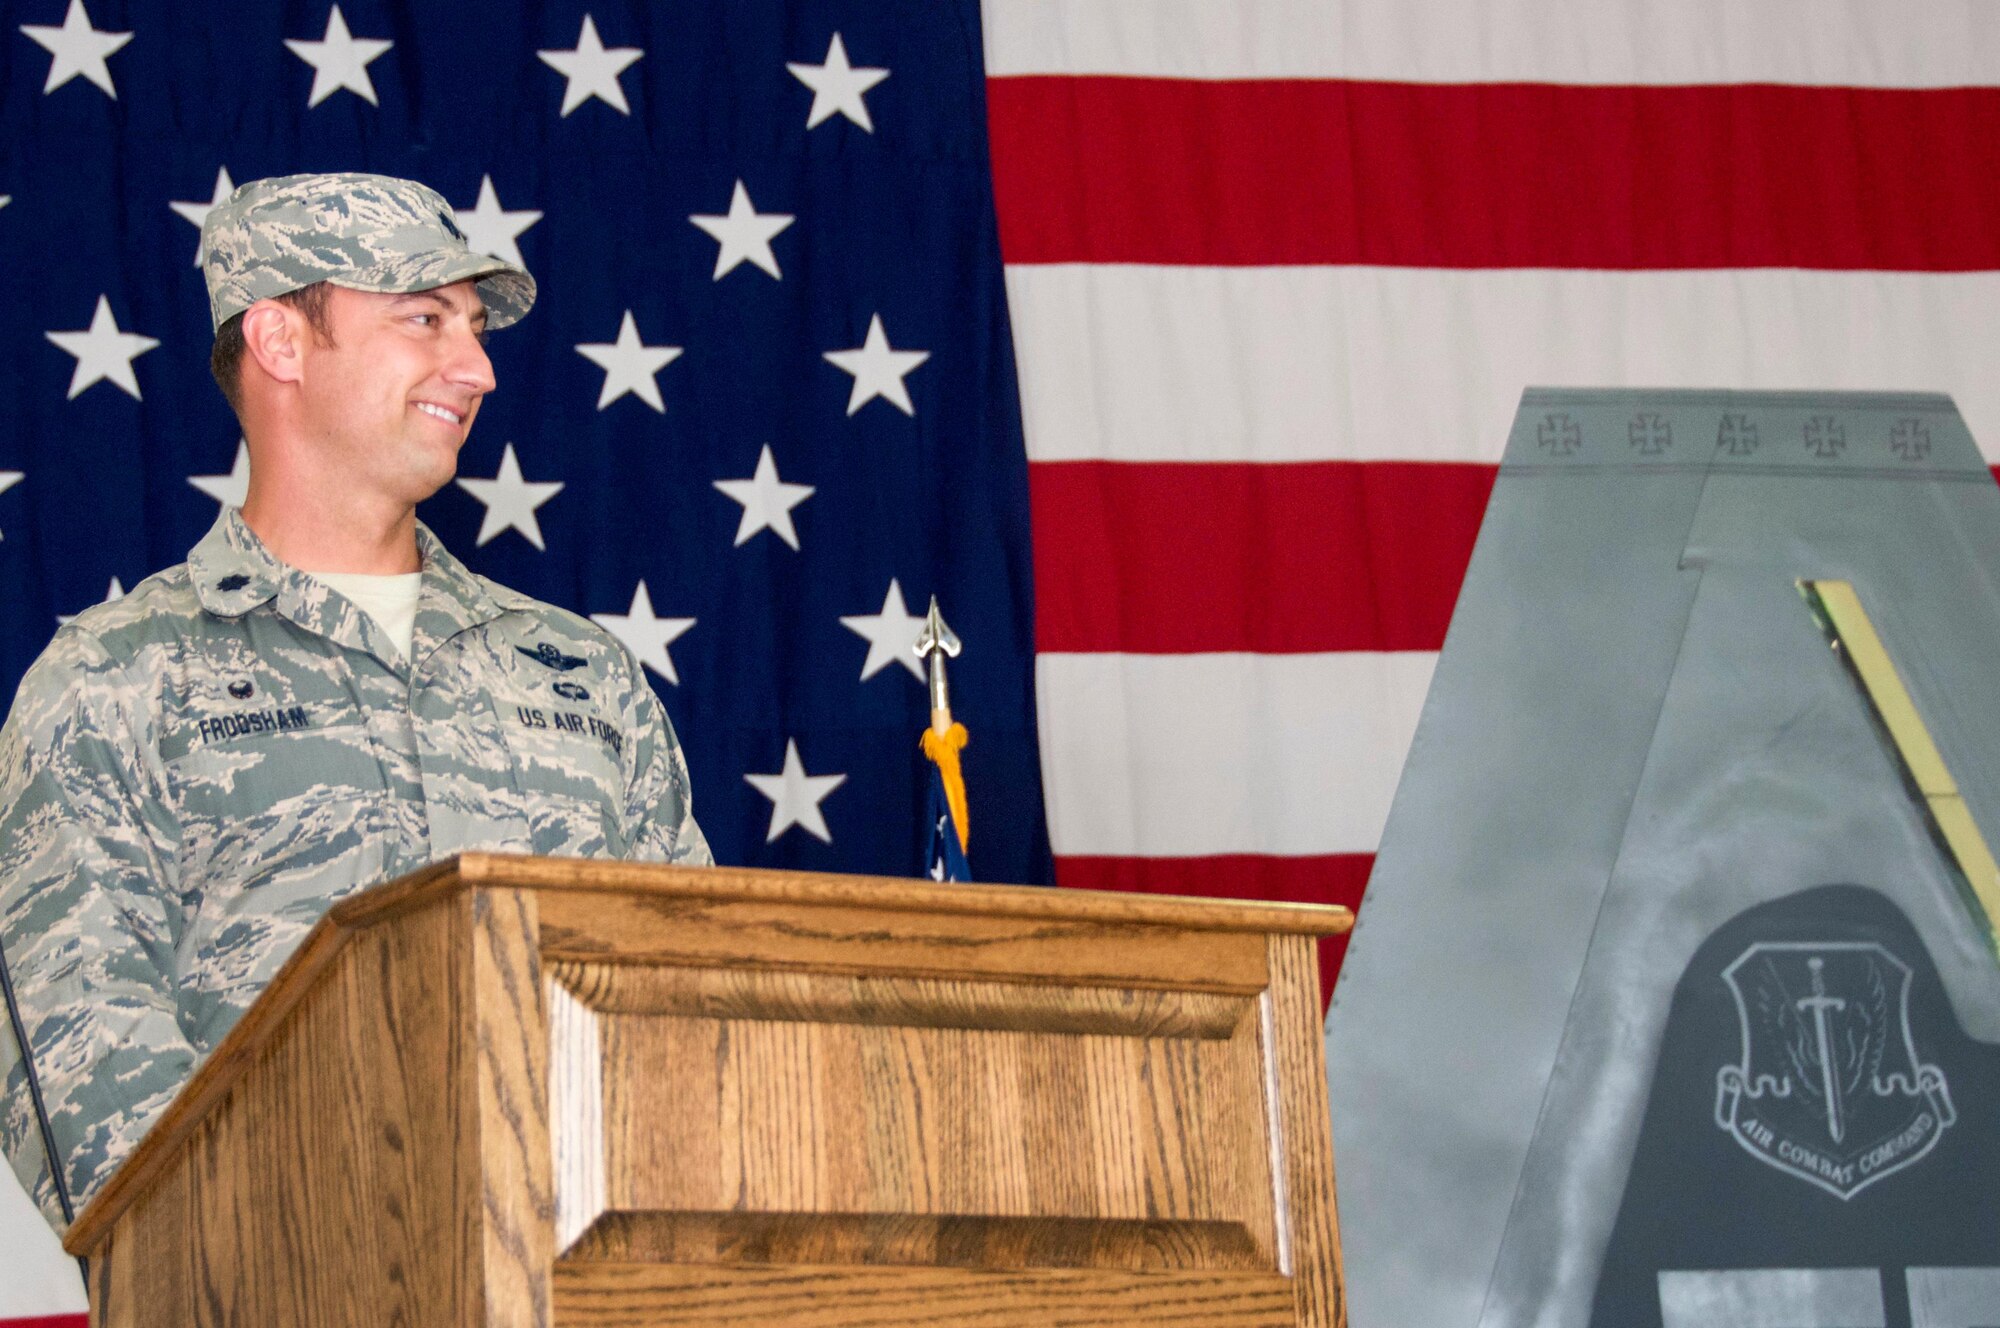 During his assumption of command speech, Lt. Col. Steven A. Frodsham, newly appointed 192nd Maintenance Squadron commander, acknowledges his wife, family, friends and Airmen for their support and dedication that helped get him to where he is today at Joint Base Langley-Eustis, Virginia, May 21, 2017. (U.S. Air National Guard photo by Senior Airman Kellyann Novak)
	
